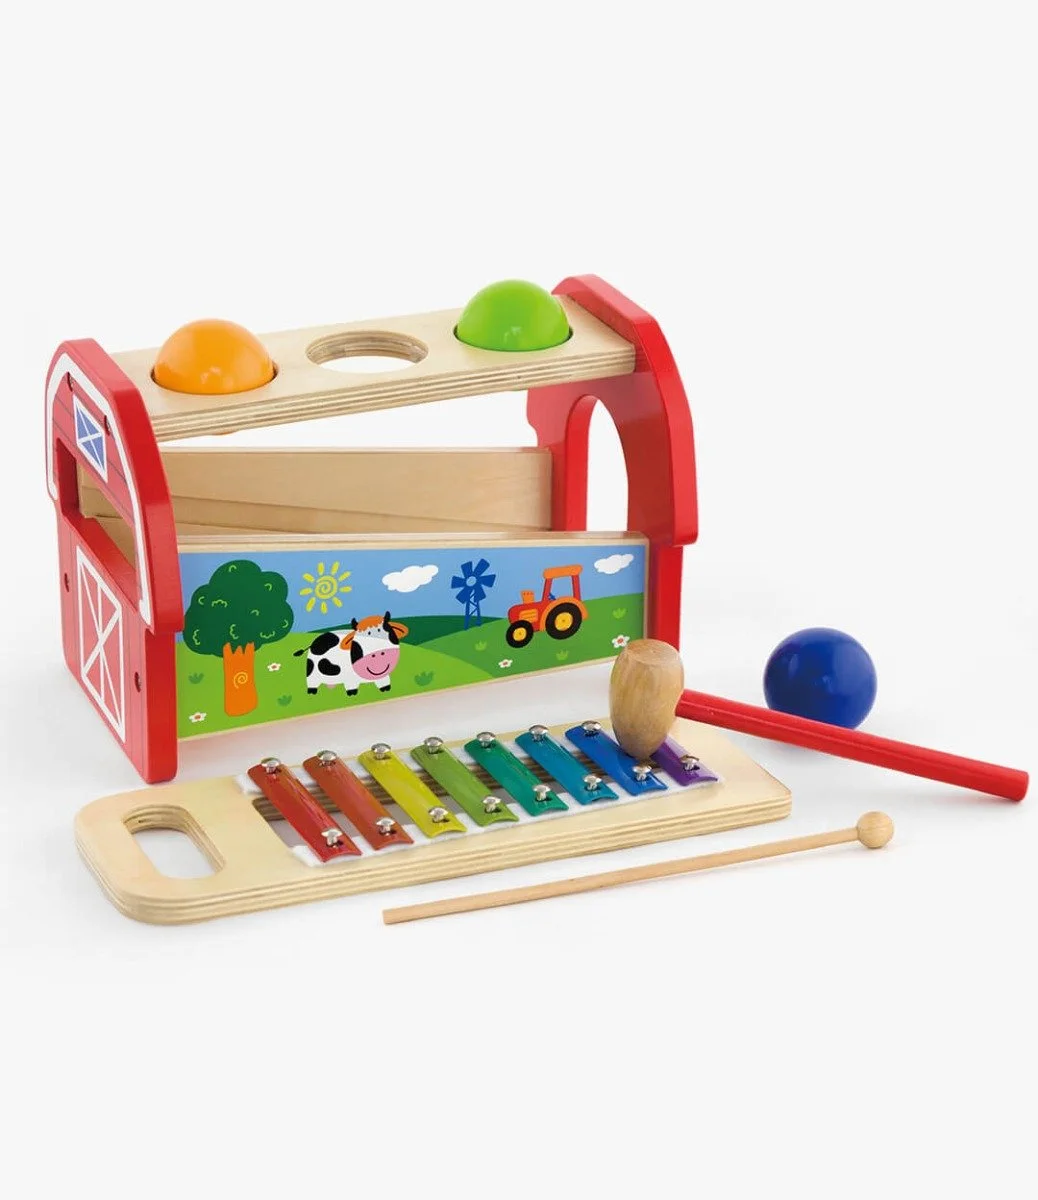 Pounding Bench & Xylophone By Viga